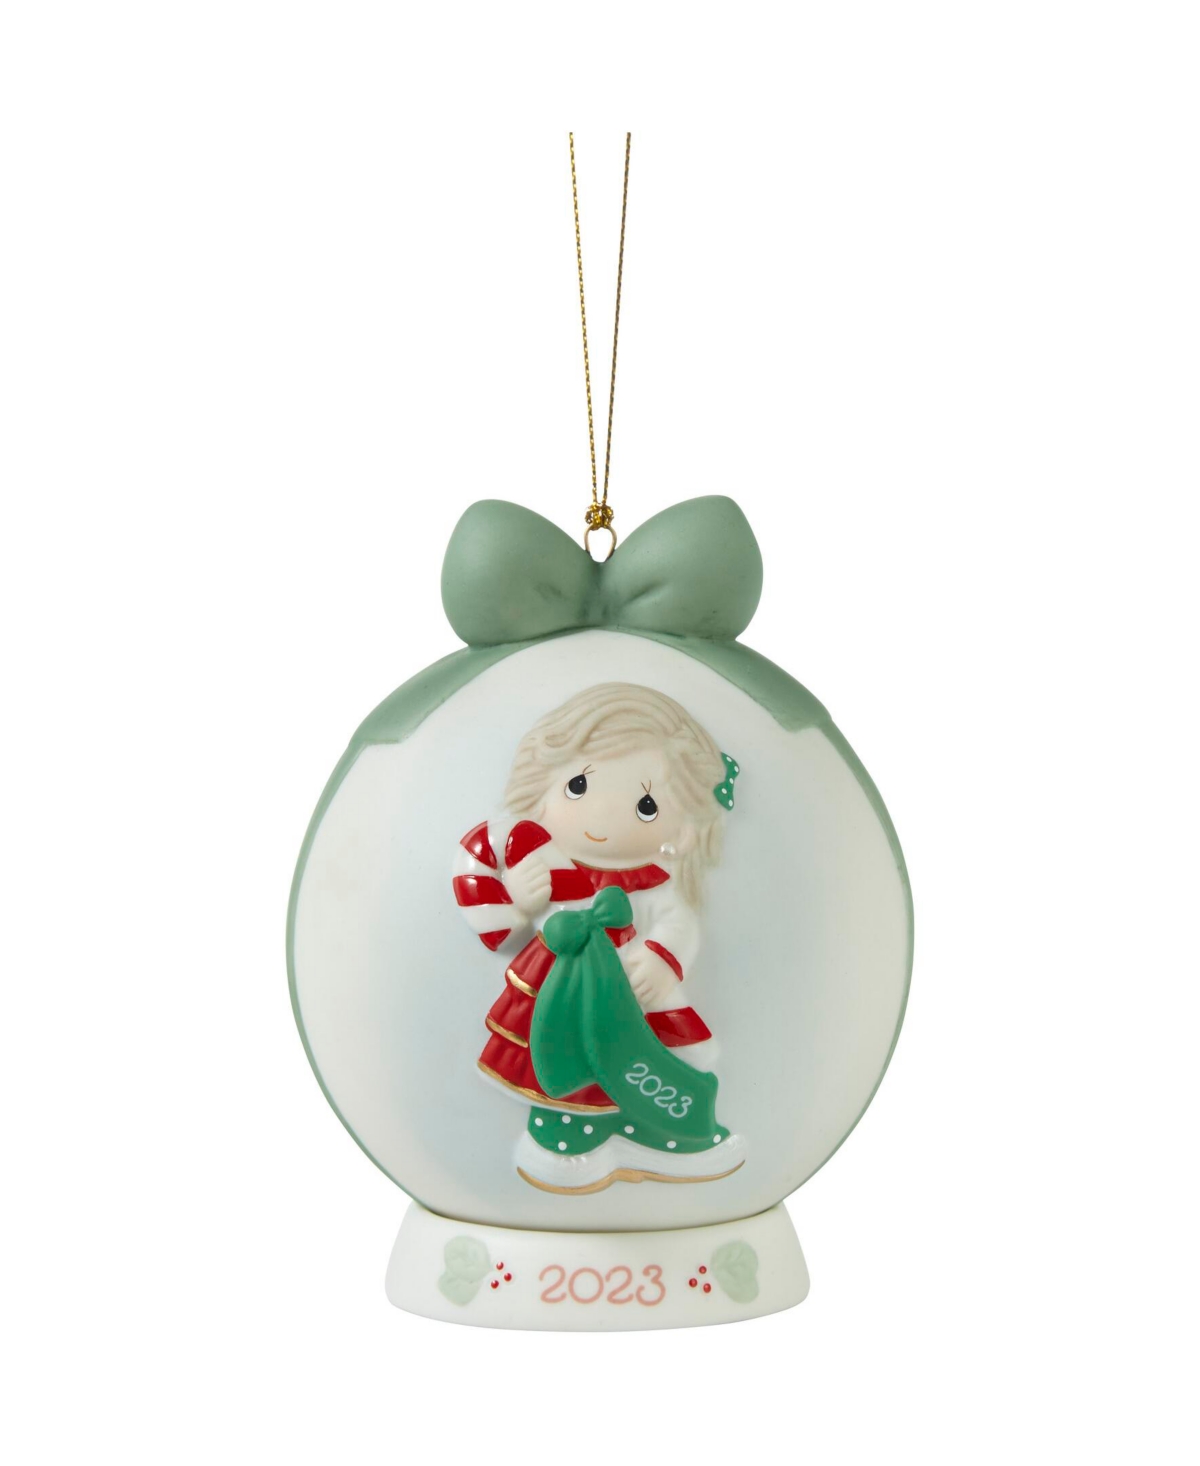 Precious Moments Sweet Christmas Wishes 2023 Dated Ball Bisque Porcelain Ornament In Multicolored